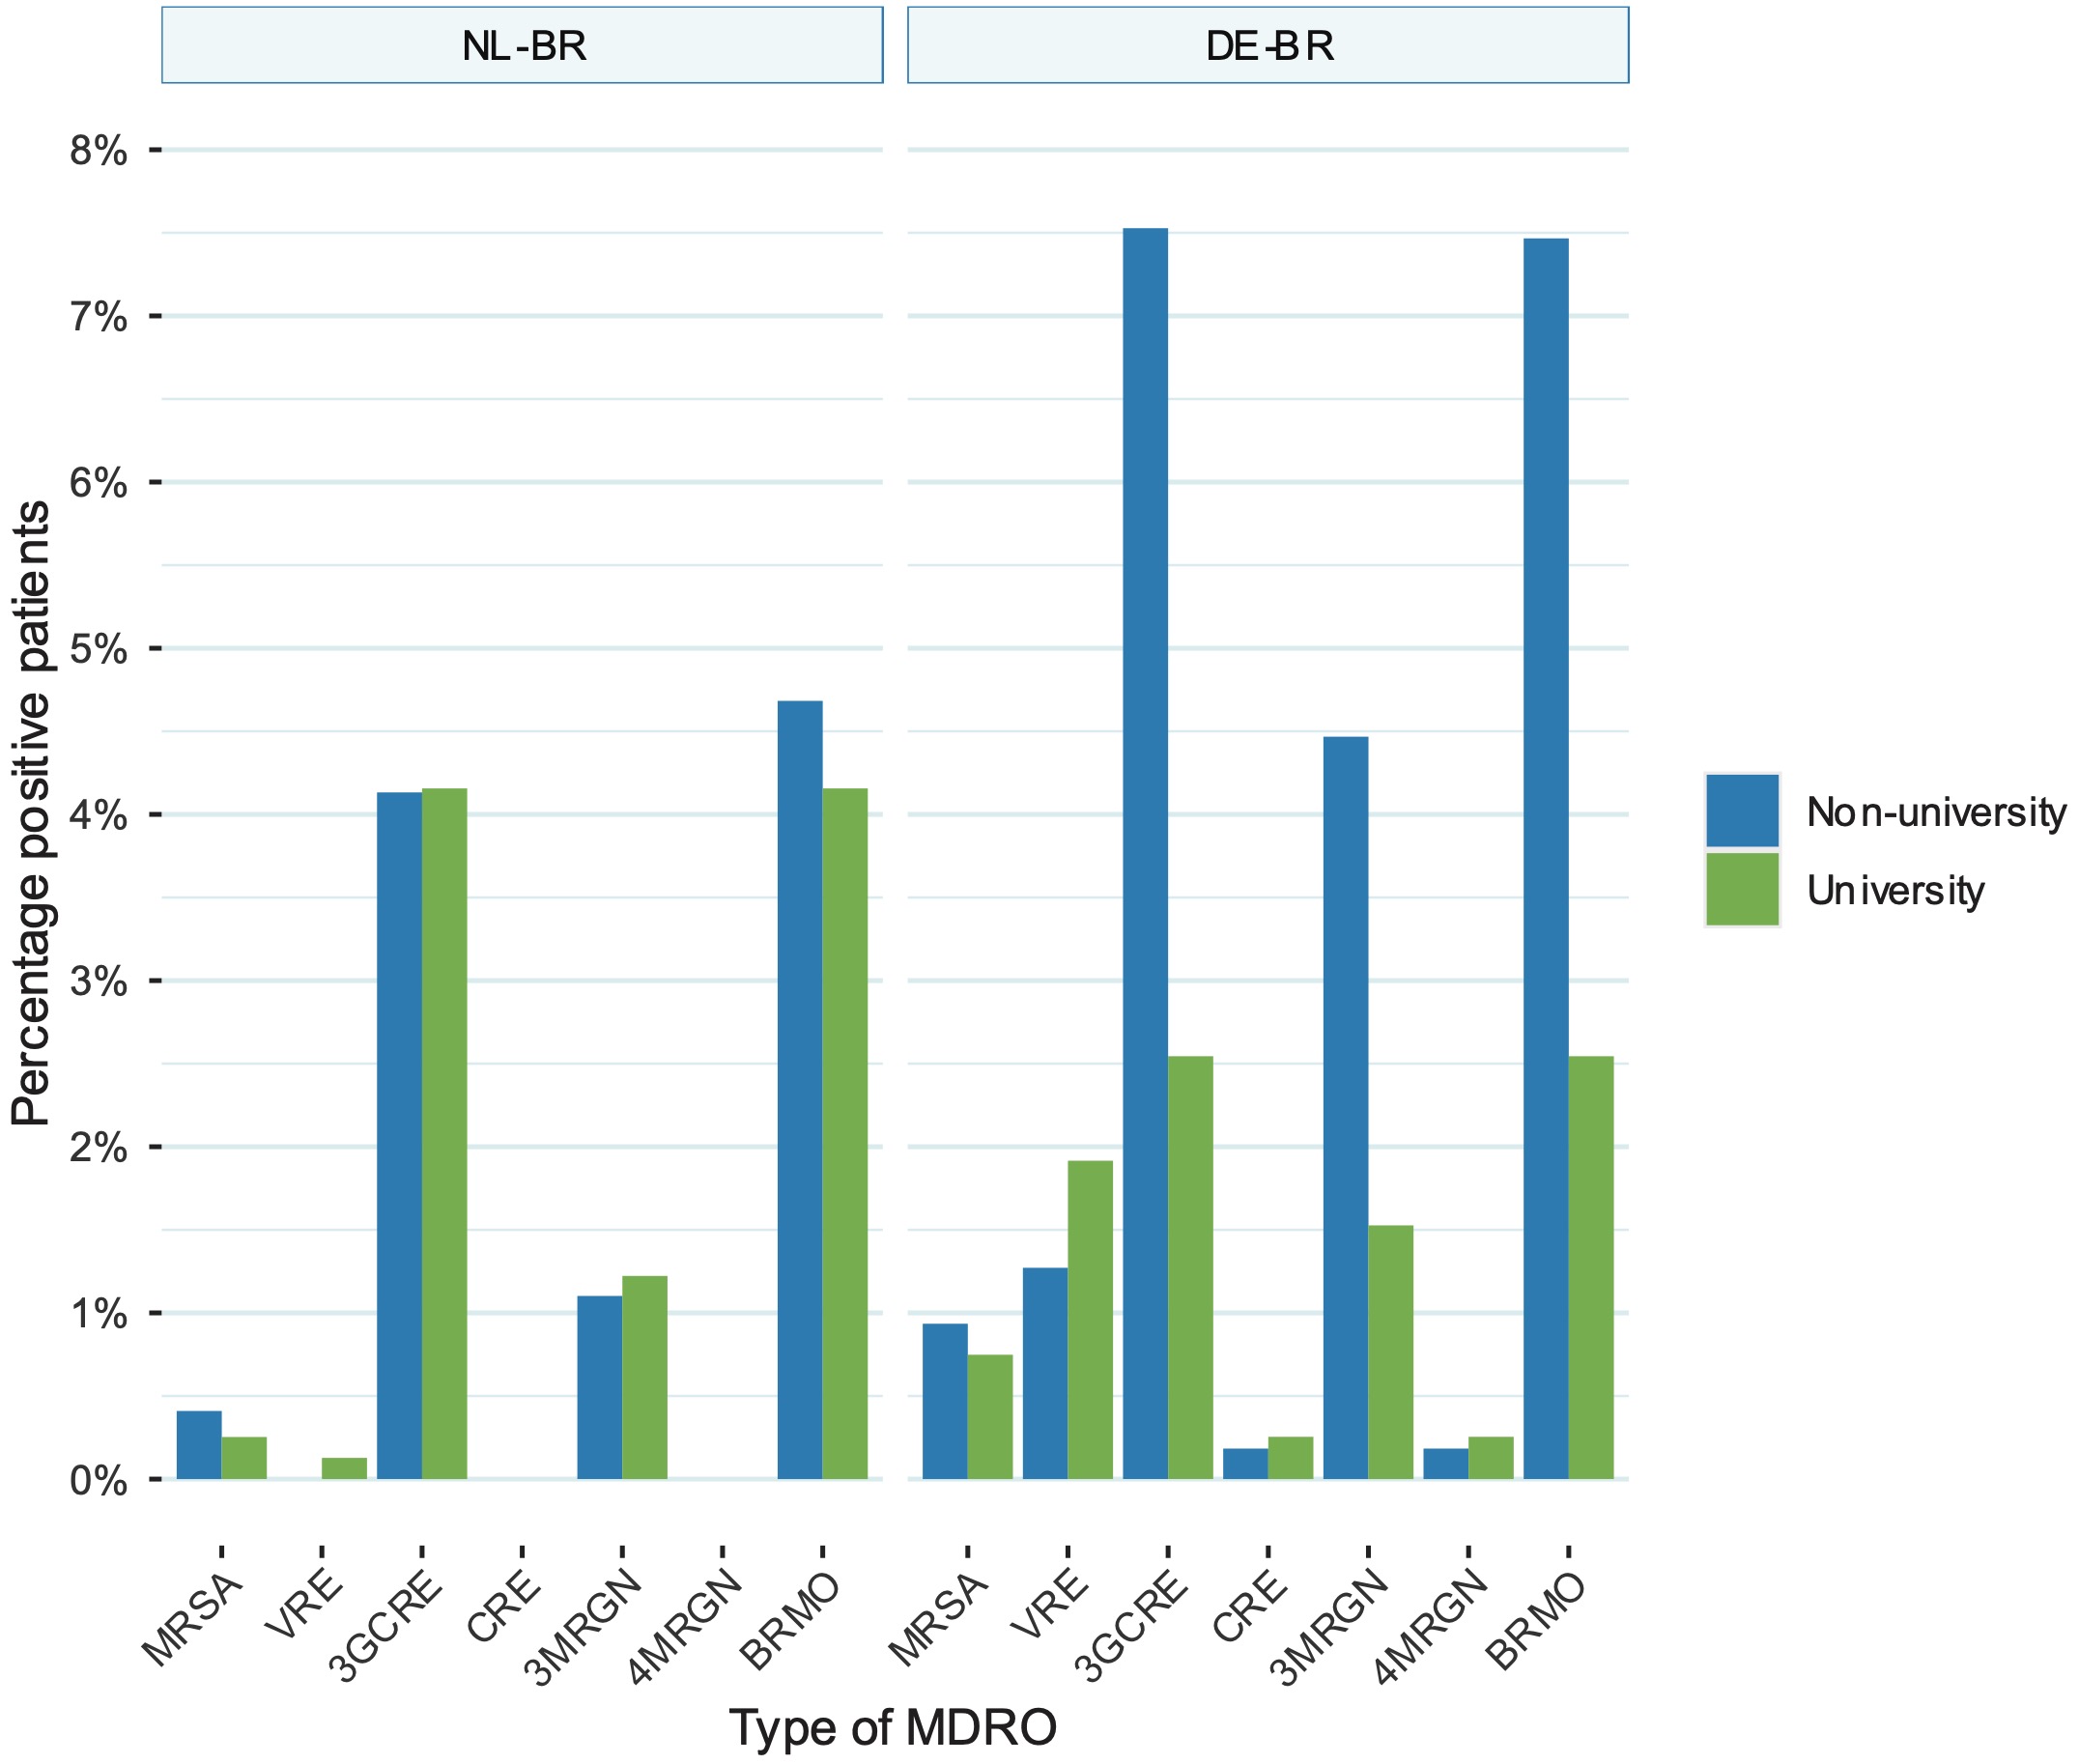 Comparison between prevalence of MRSA, VRE, 3GCRE, CRE, 3MRGN, 4MRGN and BRMO between non-university and university hospital ICUs in the NL-BR and DE-BR. 3MRGN: multiresistant Gram-negative rods with resistance to 3 of the 4 antibiotic groups (multiresistant Gram-negative rods with resistance to 3 of the 4 antibiotic groups); 4MRGN: multidrug-resistant Gram-negative rods with resistance to 4 of the 4 antibiotic groups (multidrug-resistant Gram-negative rods with resistance to 4 of the 4 antibiotic groups); 3GCR: third-generation cephalosporin-resistant *Enterobacteriaceae*; BRMO: bijzonder-resistente microorganisme (particularly resistant microorganisms); DE-BR: German cross-border region; ICU: intensive care unit; IQR: interquartile range; MRSA: methicillin-resistant Staphylococcus aureus; NL-BR: Dutch cross-border region; NL-DE-BR: total Dutch-German cross-border region; VRE: vancomycin-resistant enterococci, CRE: carbapenem-resistant *Enterobacteriaceae*.